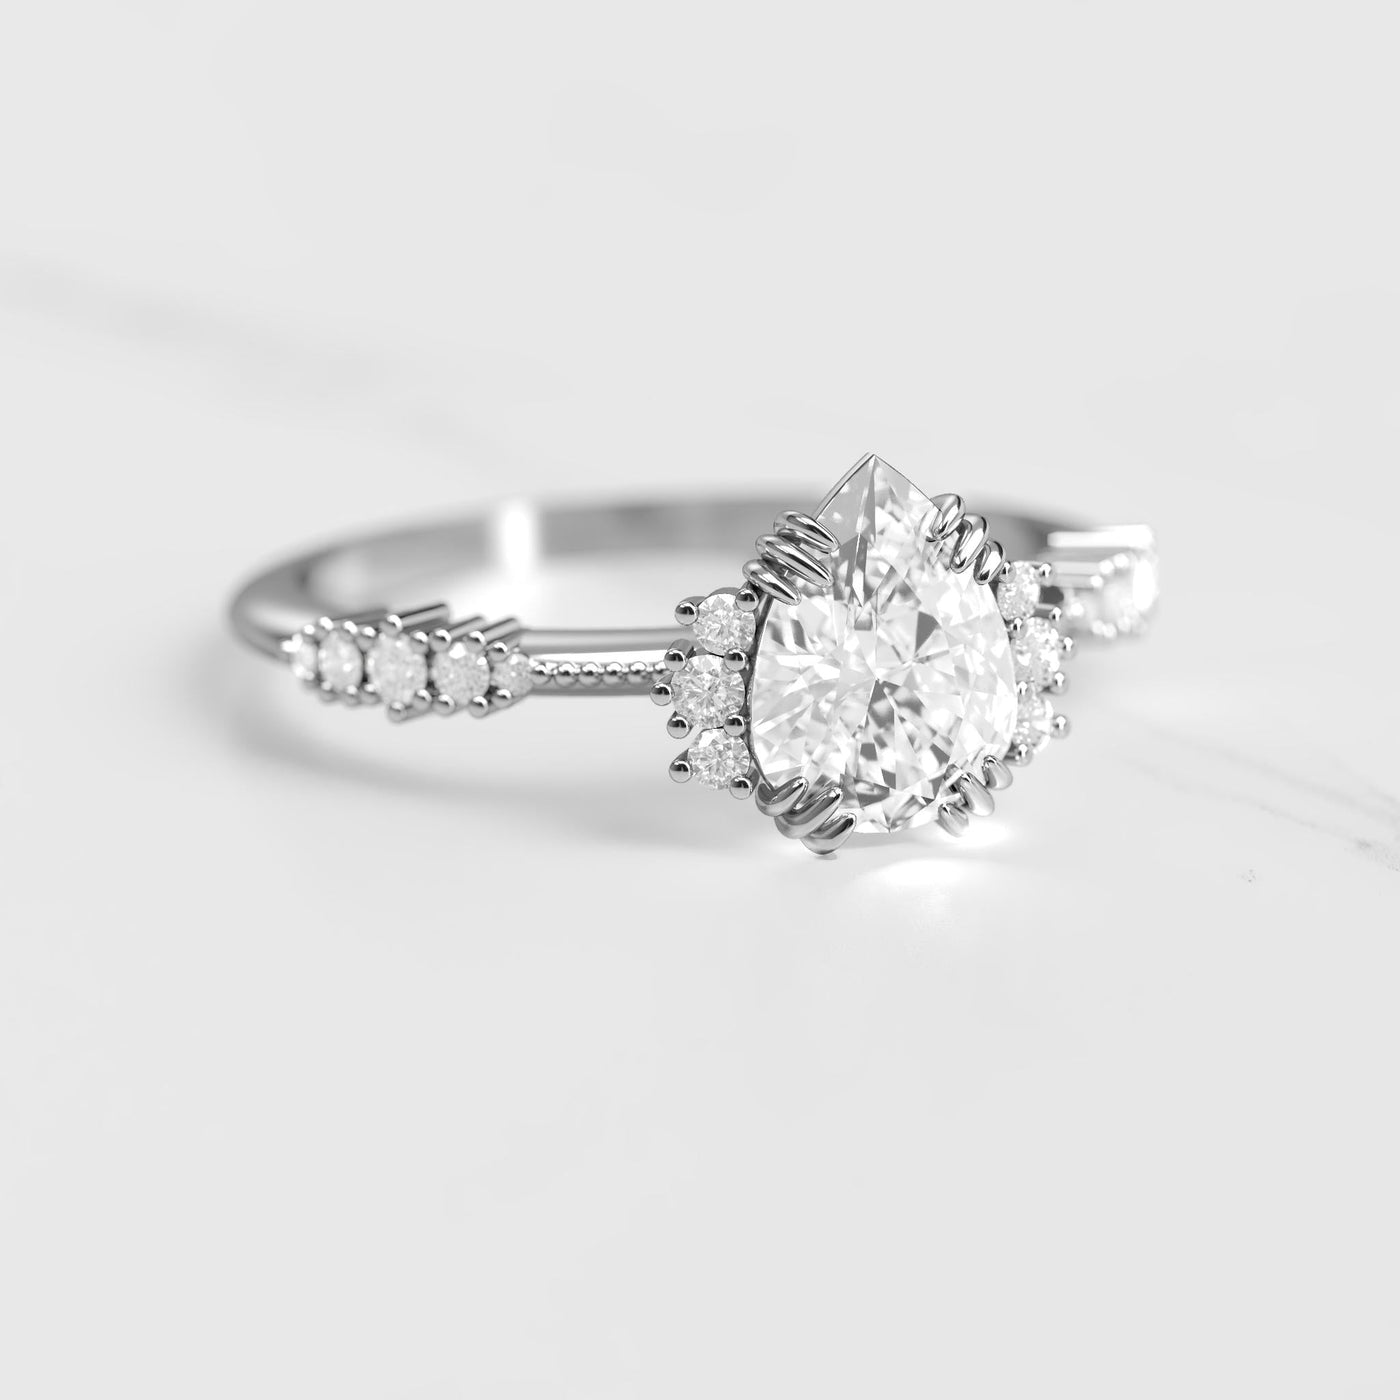 Pear-shaped white natural diamond cluster ring